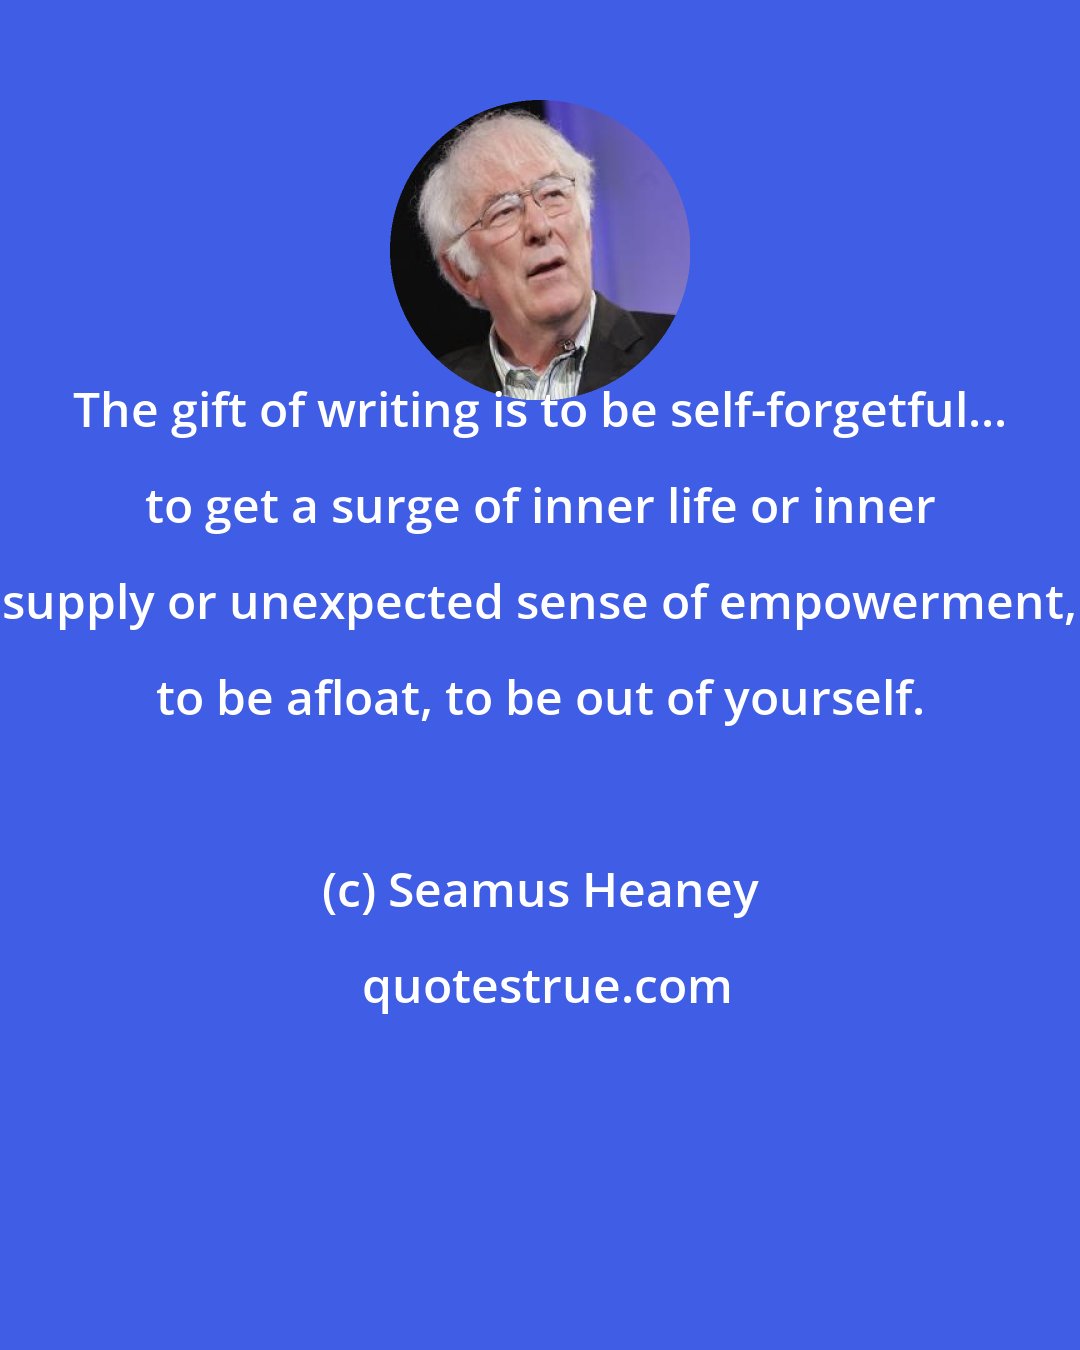 Seamus Heaney: The gift of writing is to be self-forgetful... to get a surge of inner life or inner supply or unexpected sense of empowerment, to be afloat, to be out of yourself.